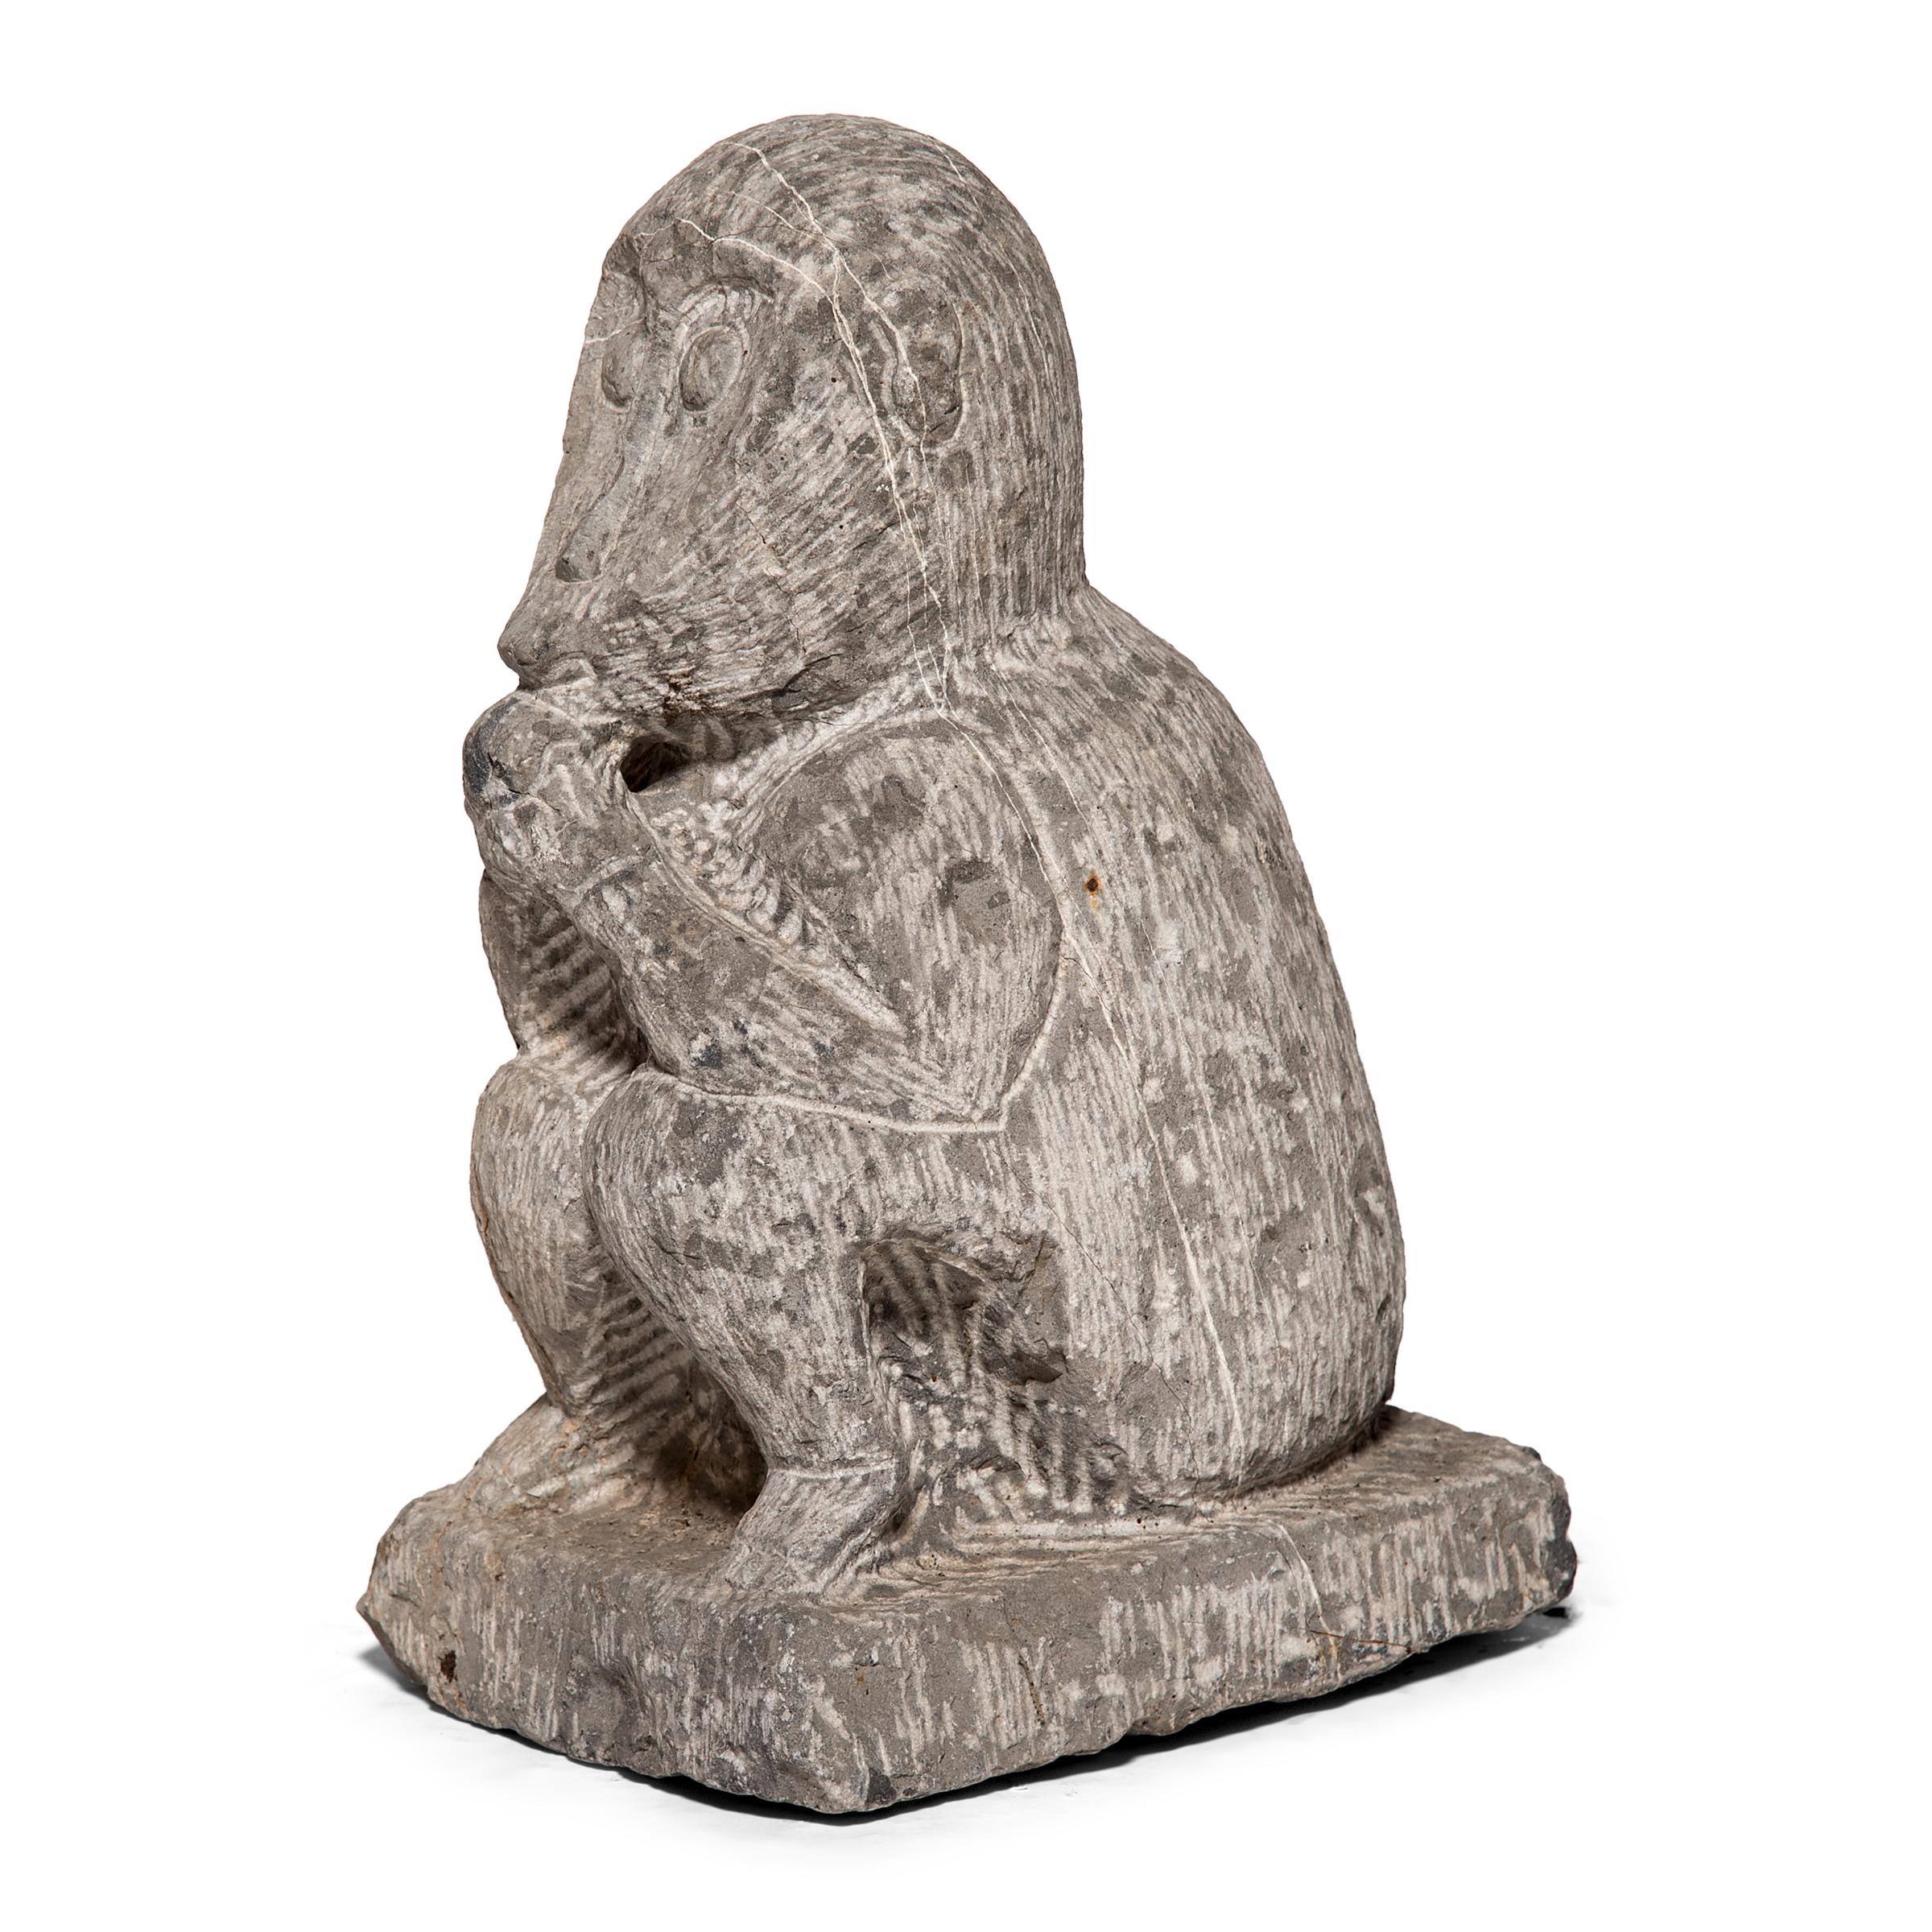 This wonderfully expressive limestone sculpture was carved in reference to the Ming-dynasty novel 